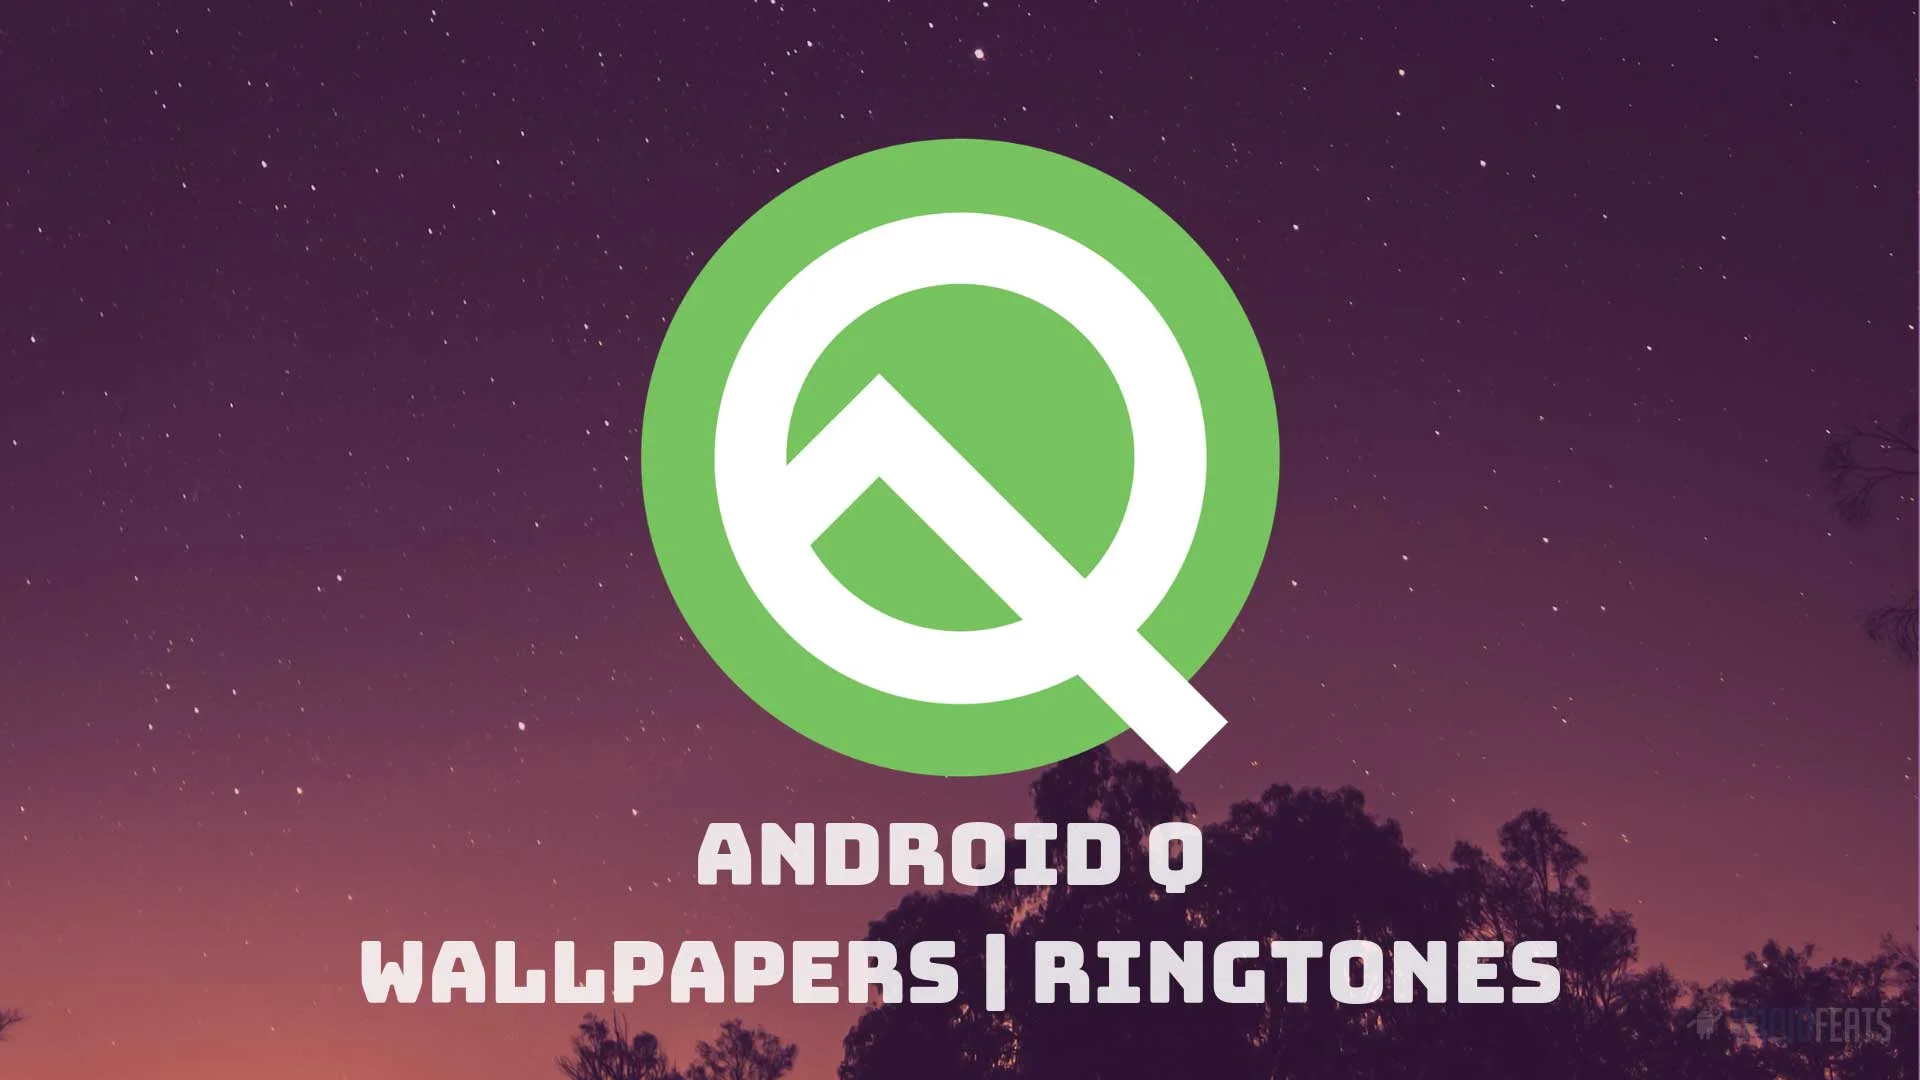 Download Android Q Stock Wallpapers and Ringtones